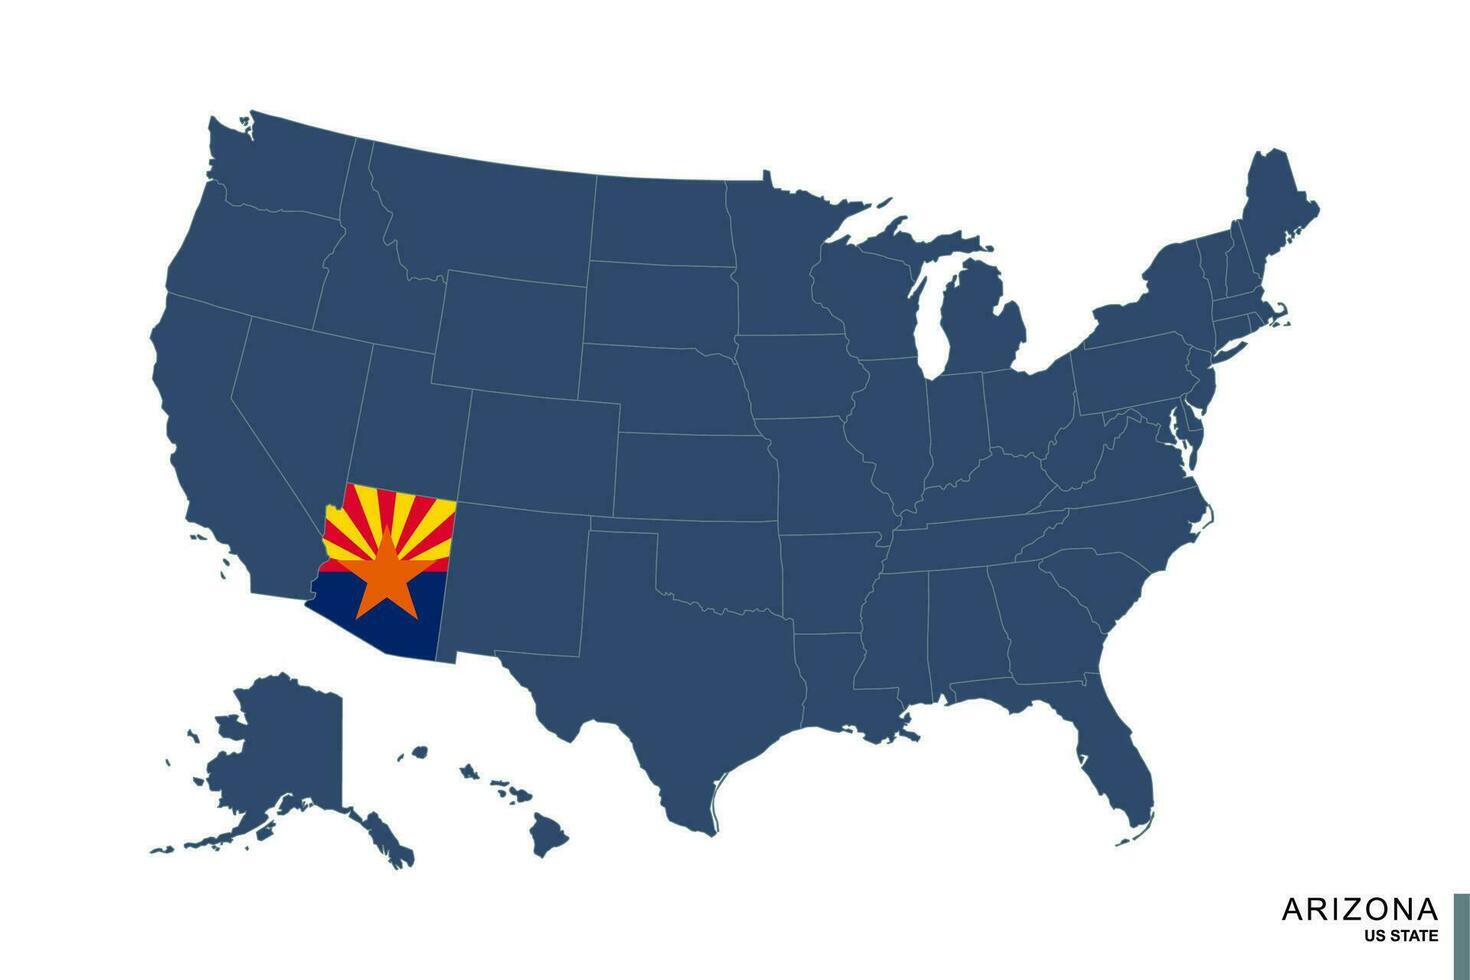 State of Arizona on blue map of United States of America. Flag and map of Arizona. vector